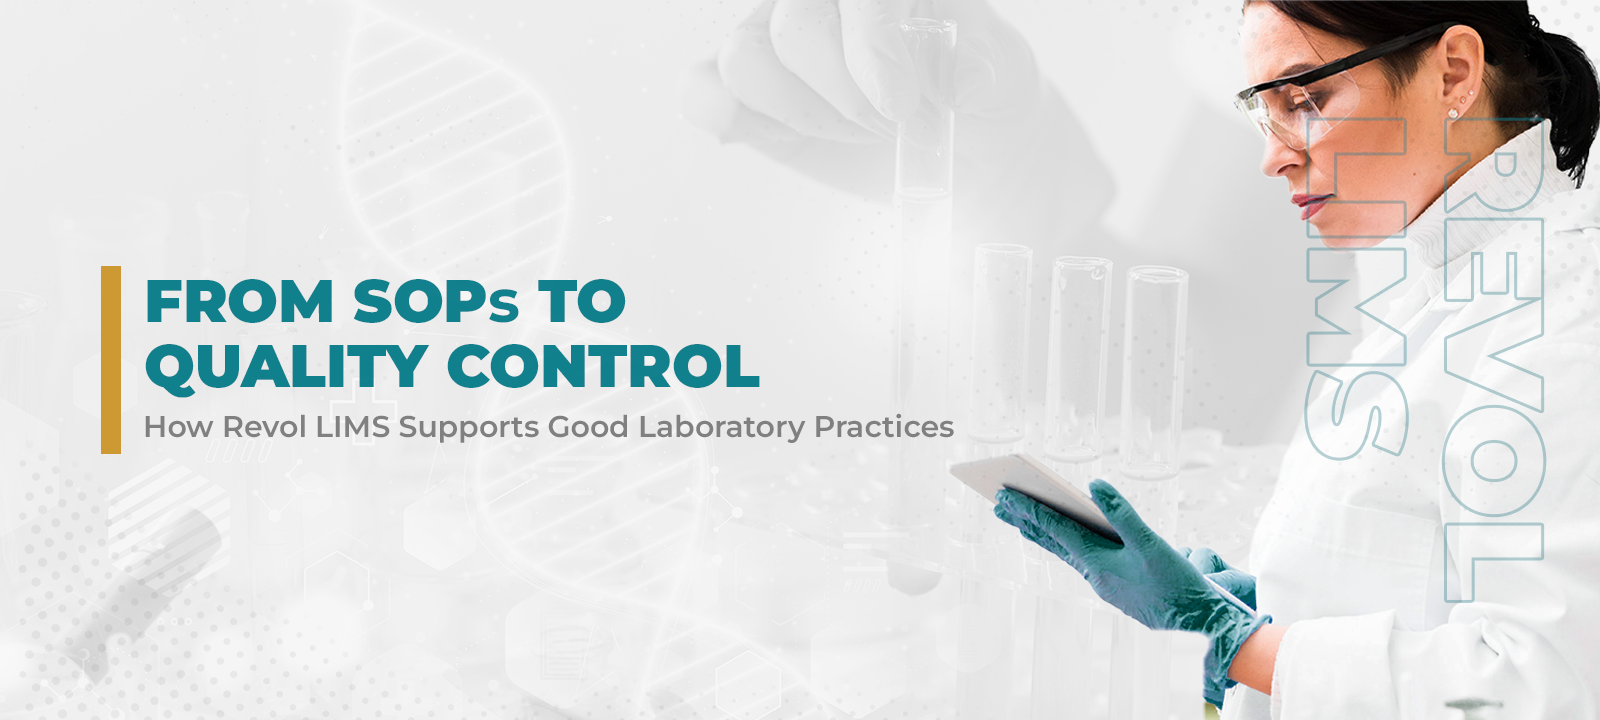 An illustrative blog banner showcasing female scientists analyzing data in a tab depicting how Revol LIMS supports Good Laboratory Practices in a quality control laboratory.